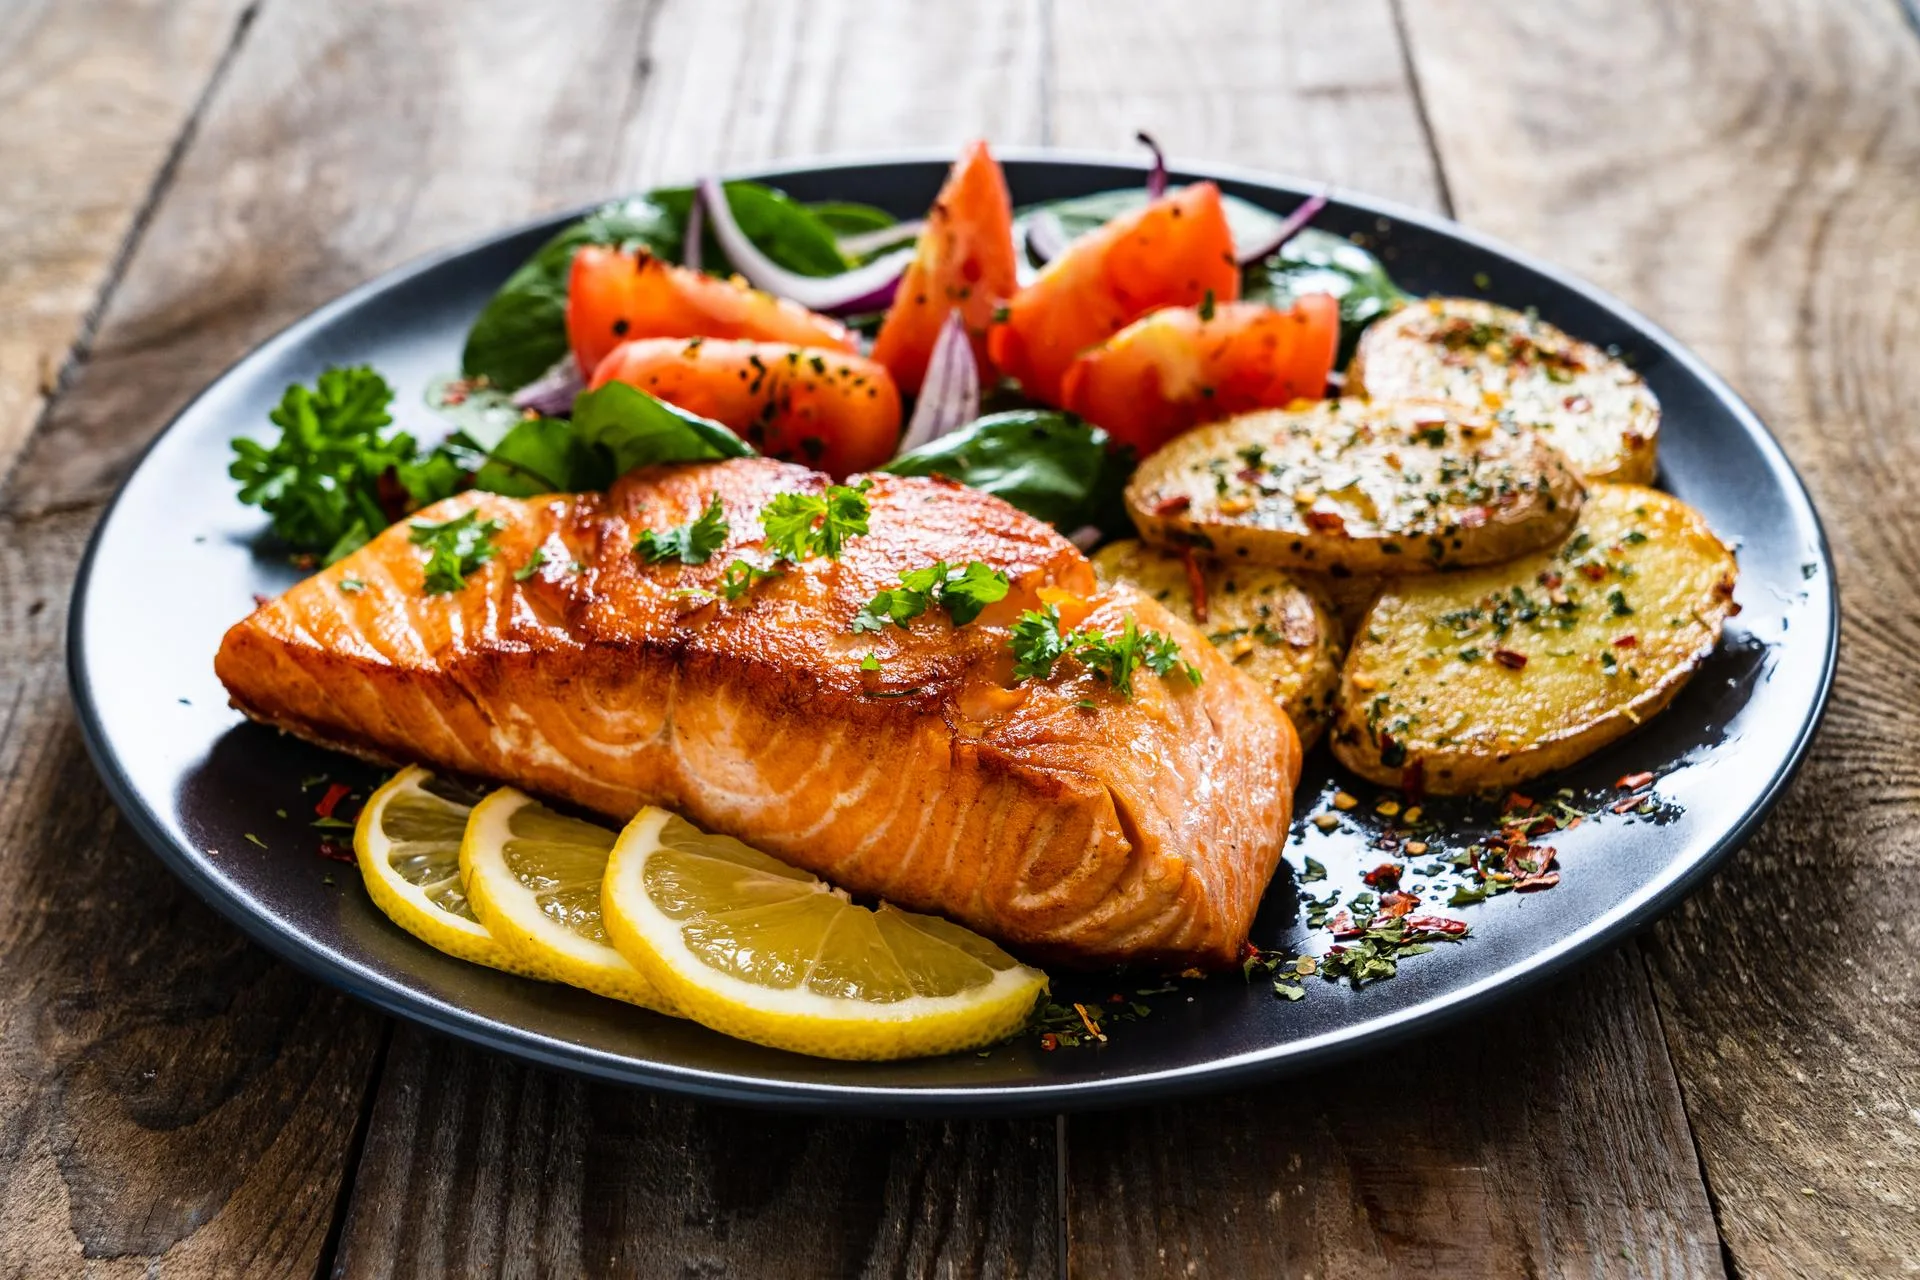 Mediterranean salmon recipes have the heart-healthy benefits of salmon.